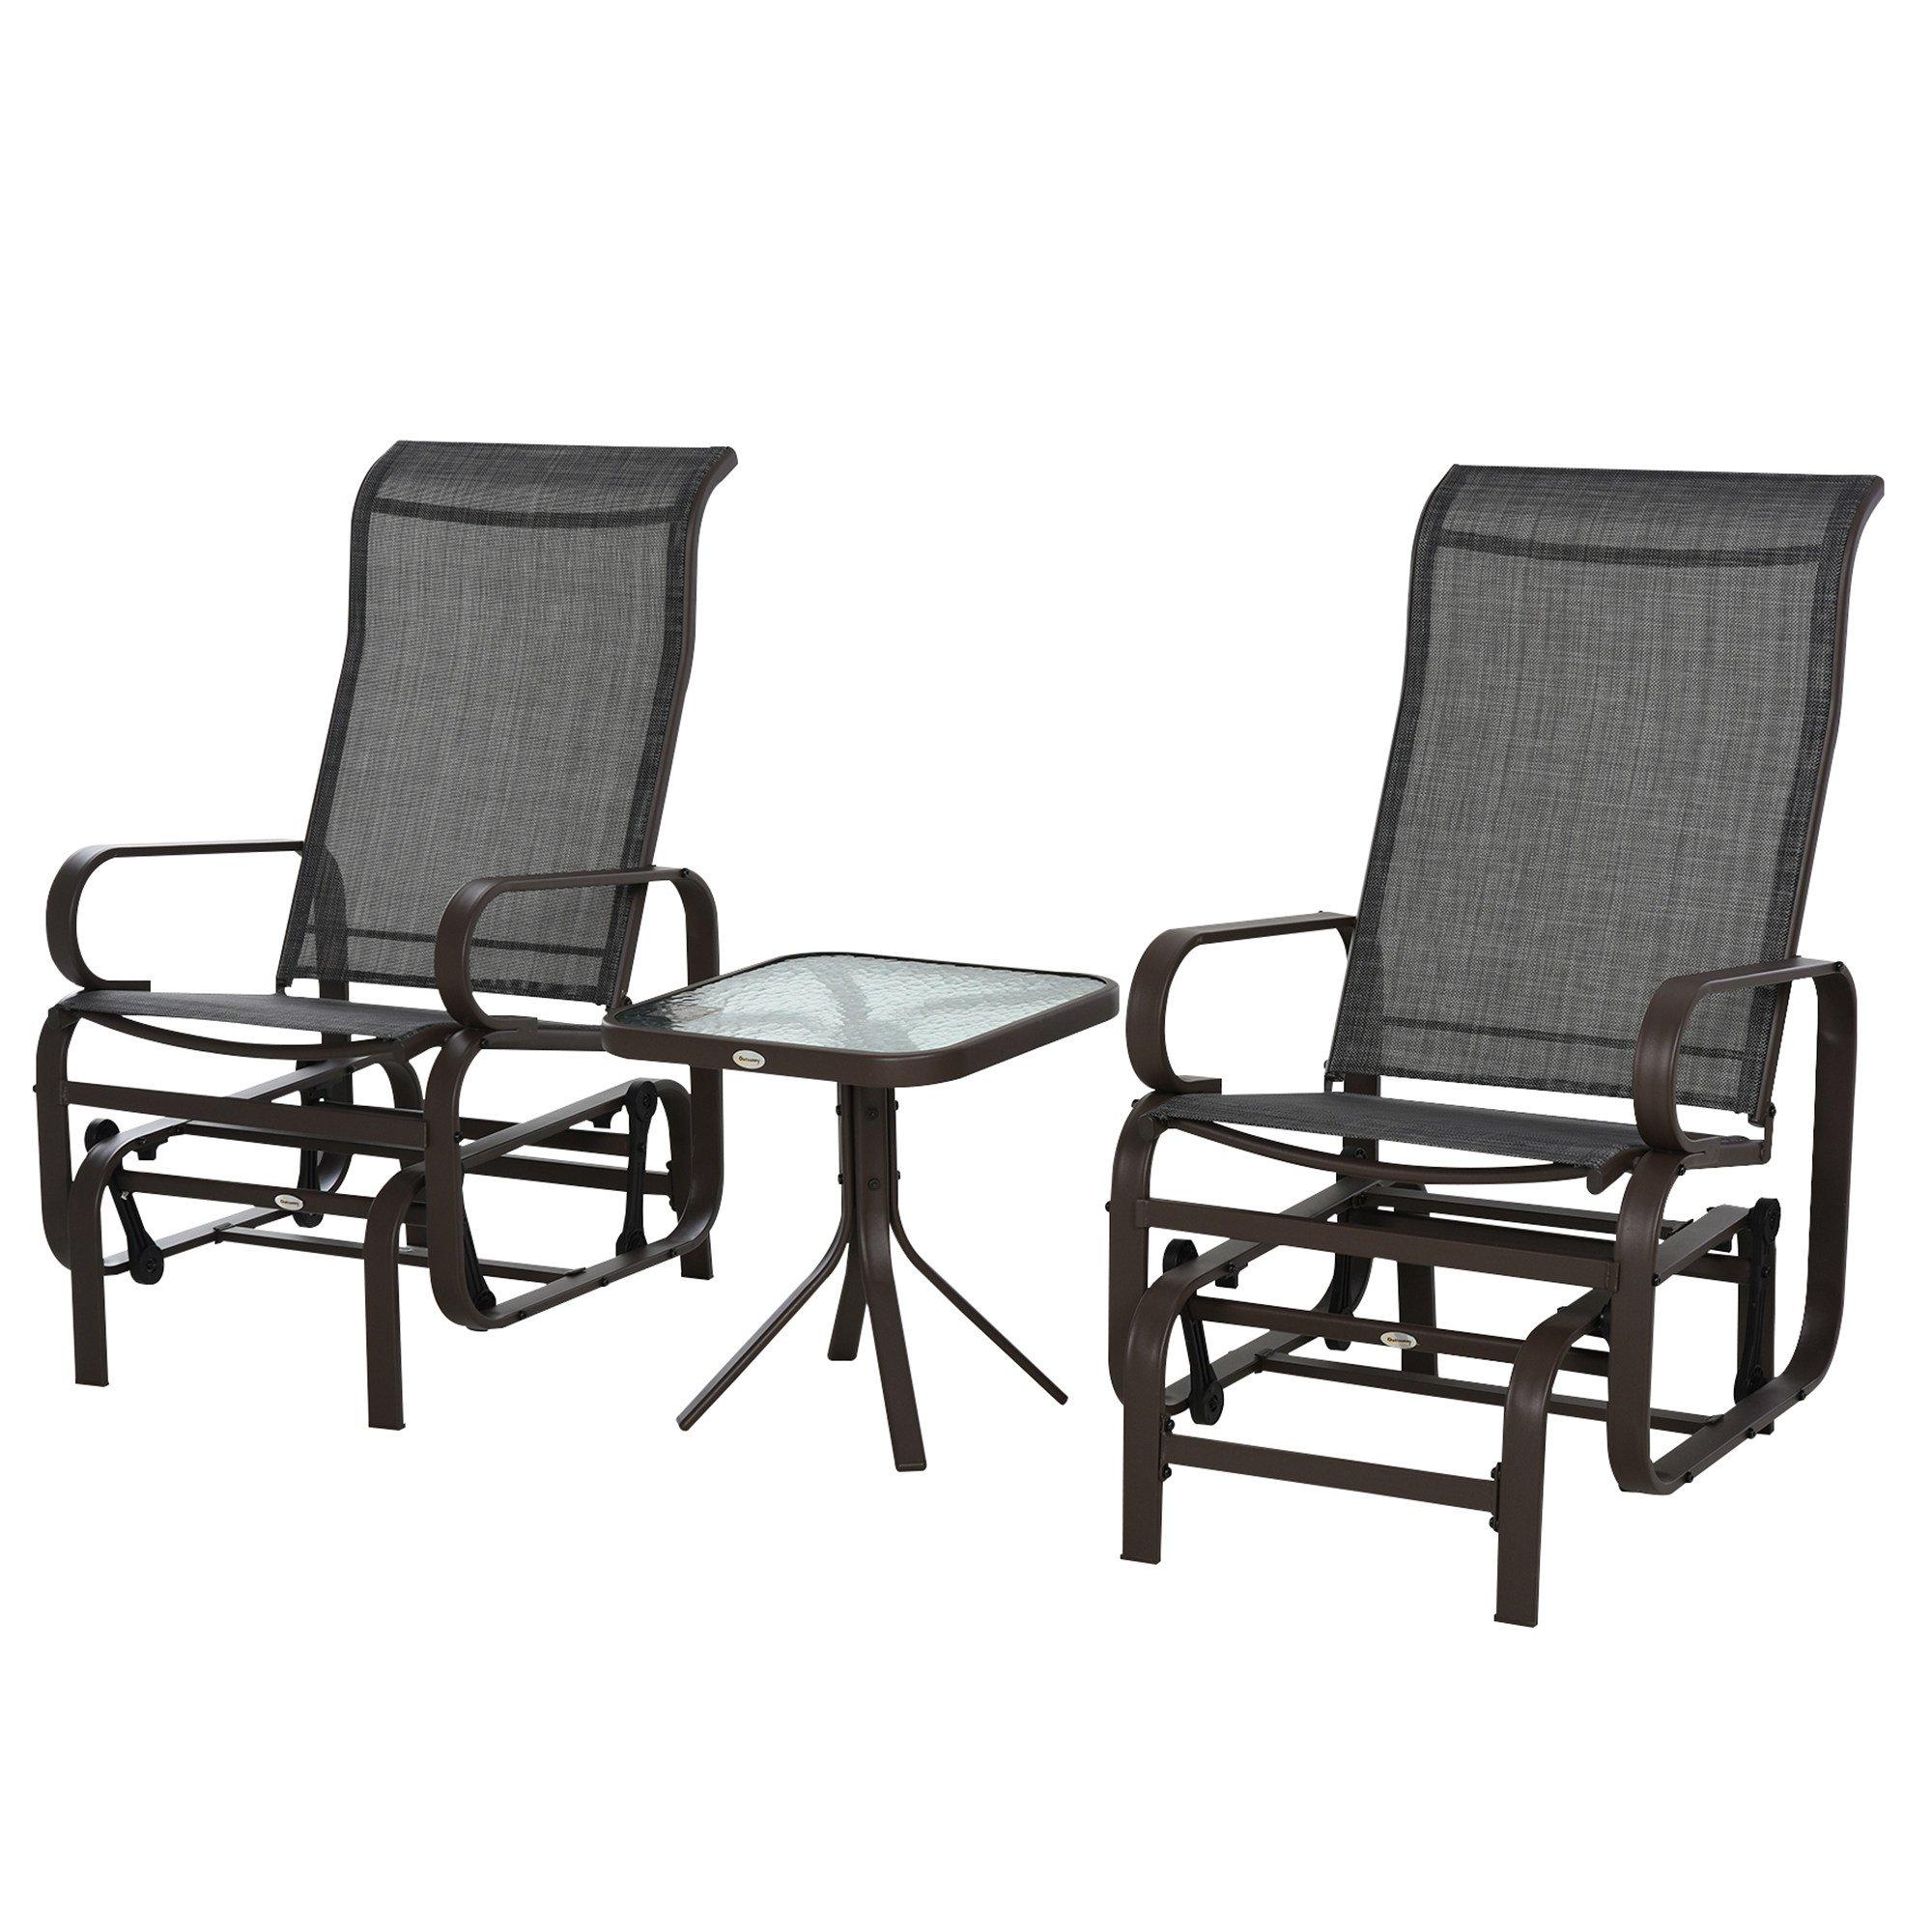 3 Pcs Rocking Chair Gliding Chair Set with Table for Patio Garden